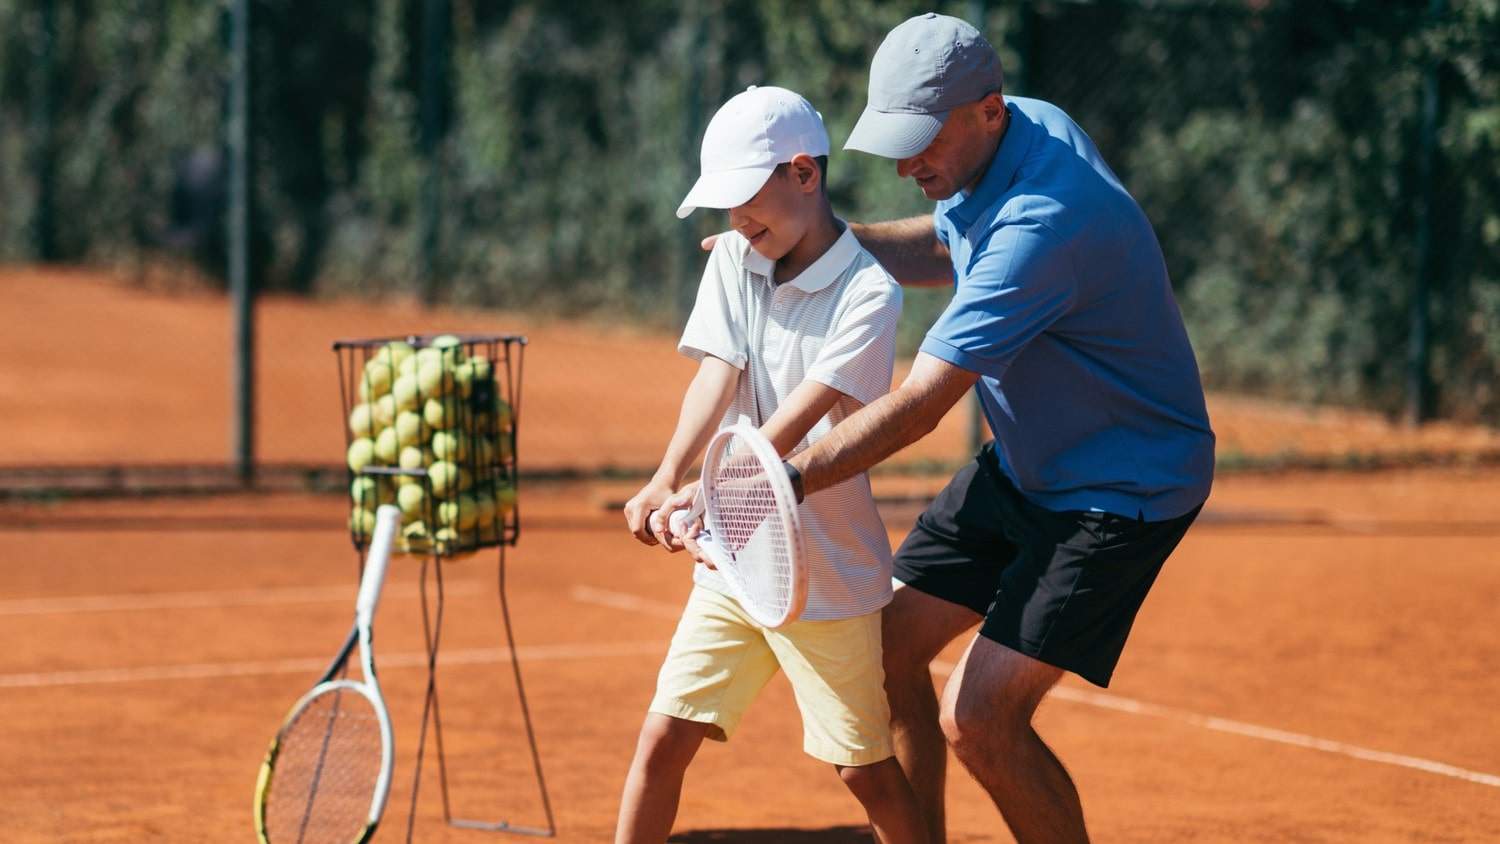 Kid being taught by a tennis instructor on how to swing the racquet.